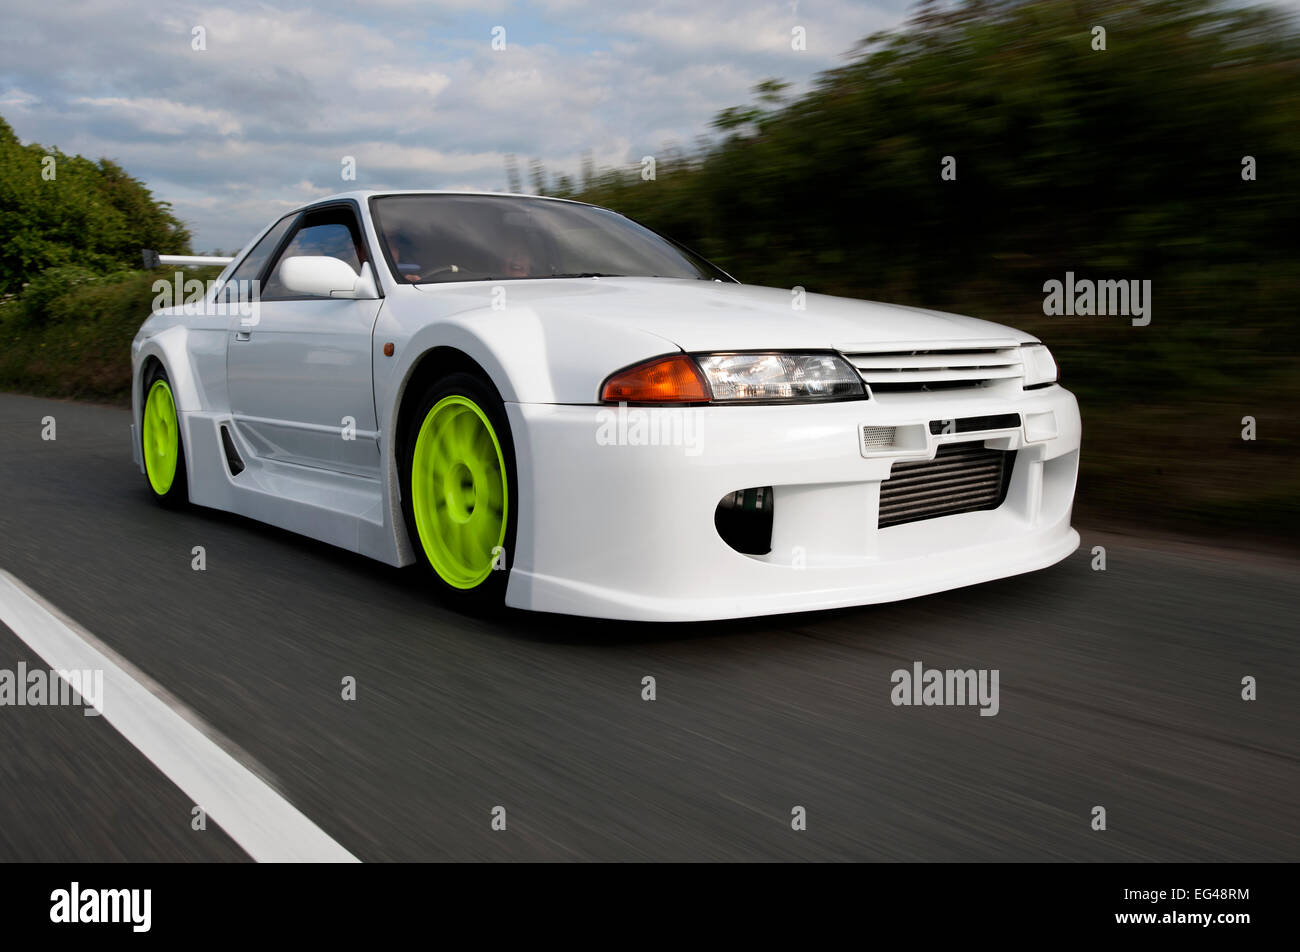 Heavily Modified Nissan R32 Skyline With A Wide Body Kit Fitted Stock Photo Alamy